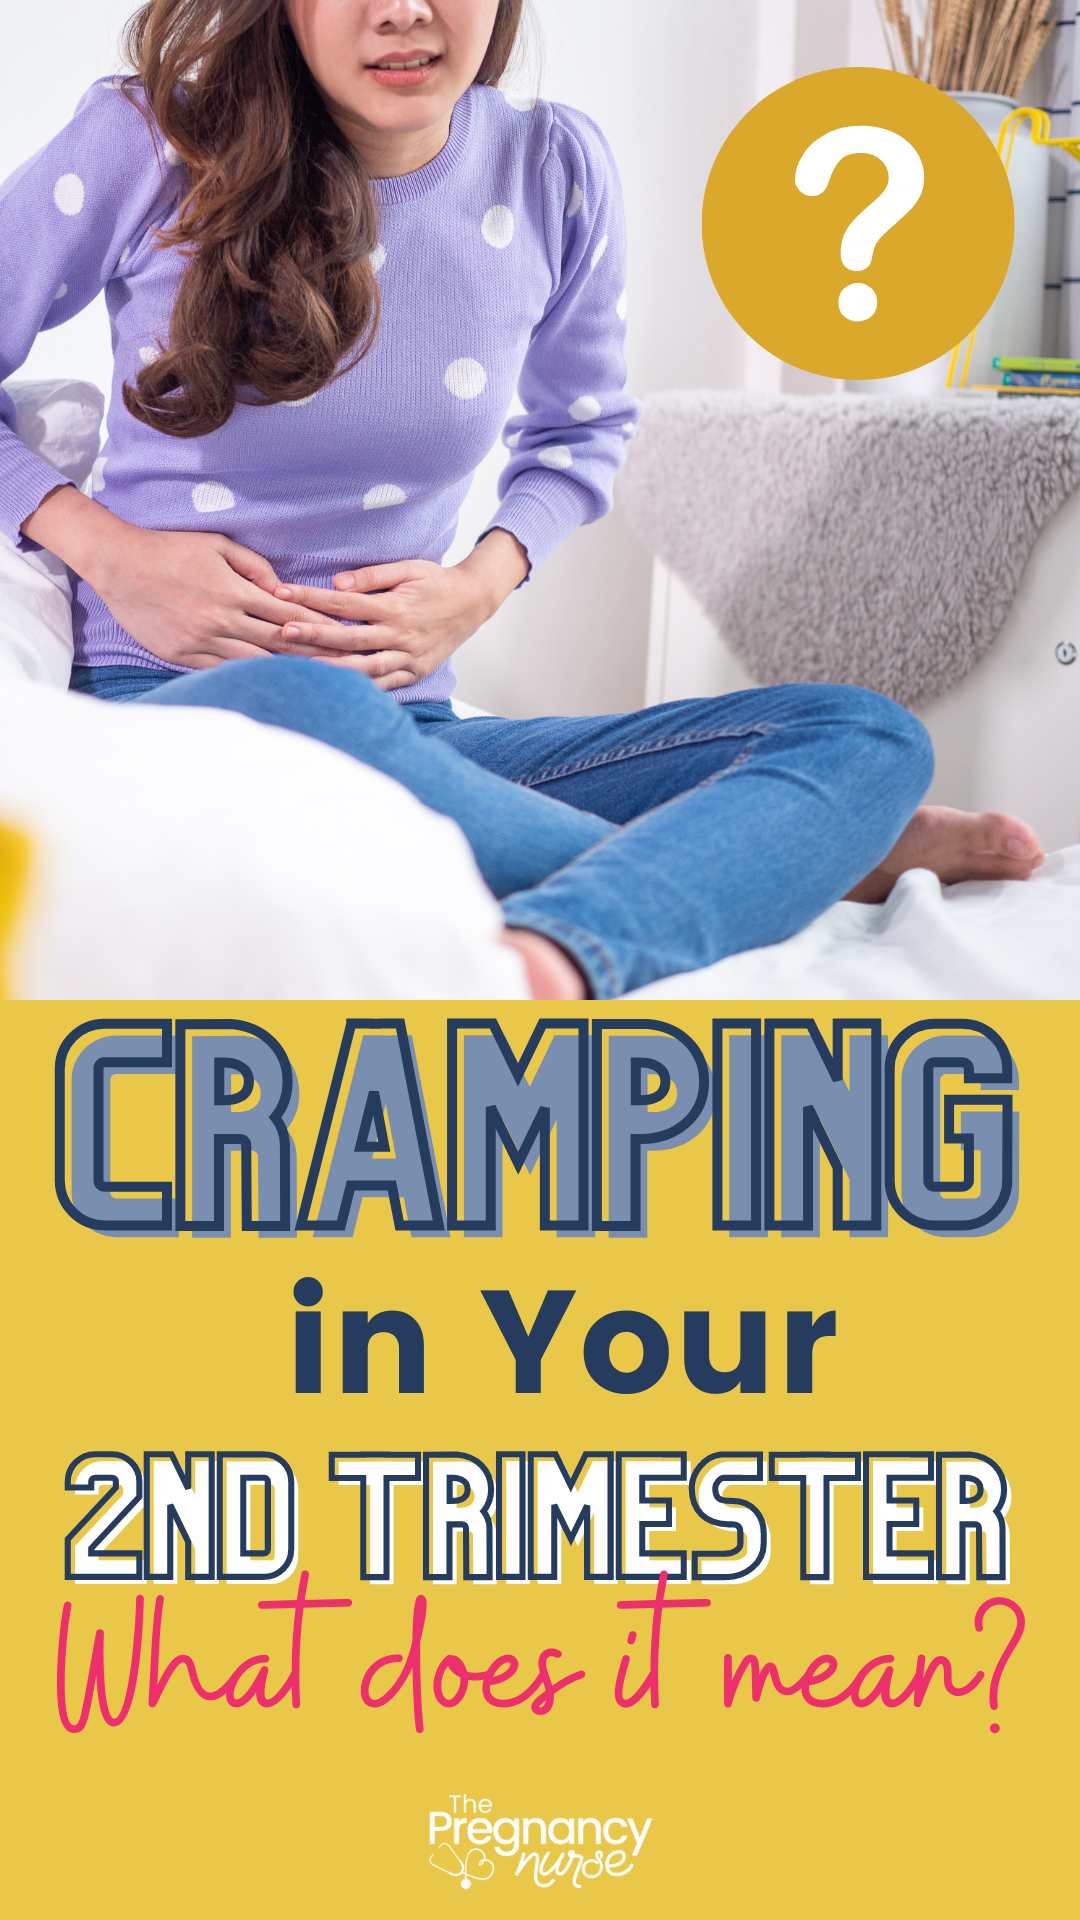 Cramps at 24 weeks of pregnancy can be an unsettling experience. While some mild cramping is normal during this stage of pregnancy, any severe or recurring cramps should be reported to your doctor right away. As you approach the beginning of your third trimester, it is important to familiarize yourself with the signs, causes, and treatments for cramping at 24 weeks of pregnancy.